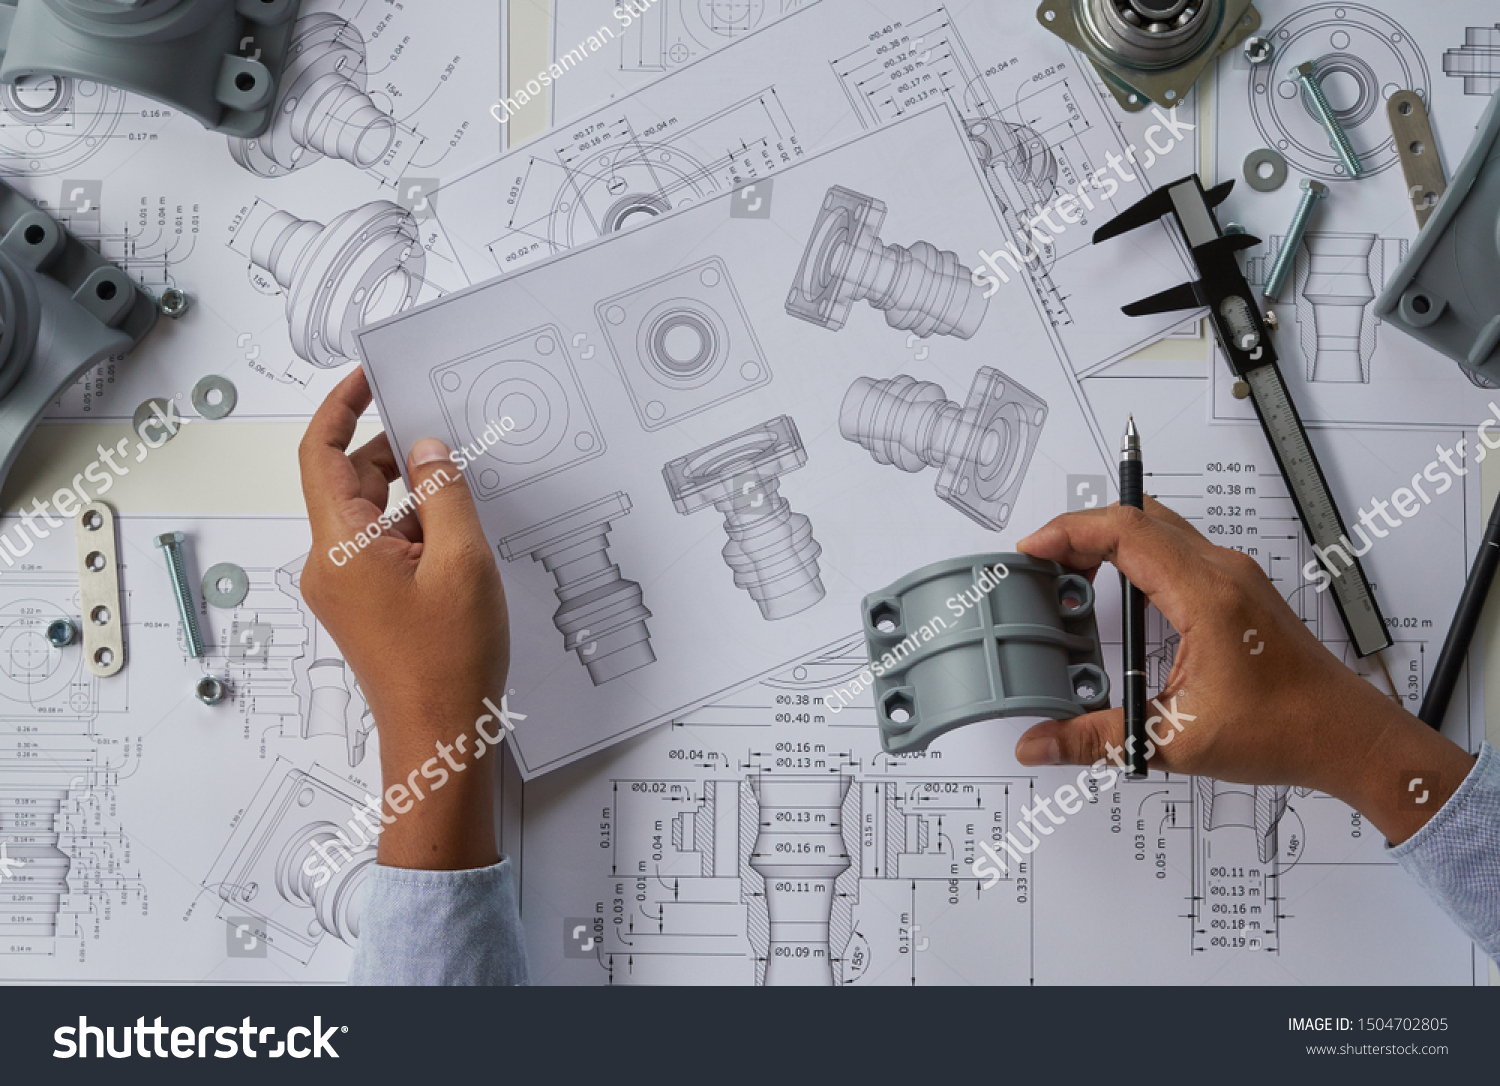 Engineer technician designing drawings mechanical parts engineering Engine
manufacturing factory Industry Industrial work project blueprints measuring bearings caliper tools #1504702805